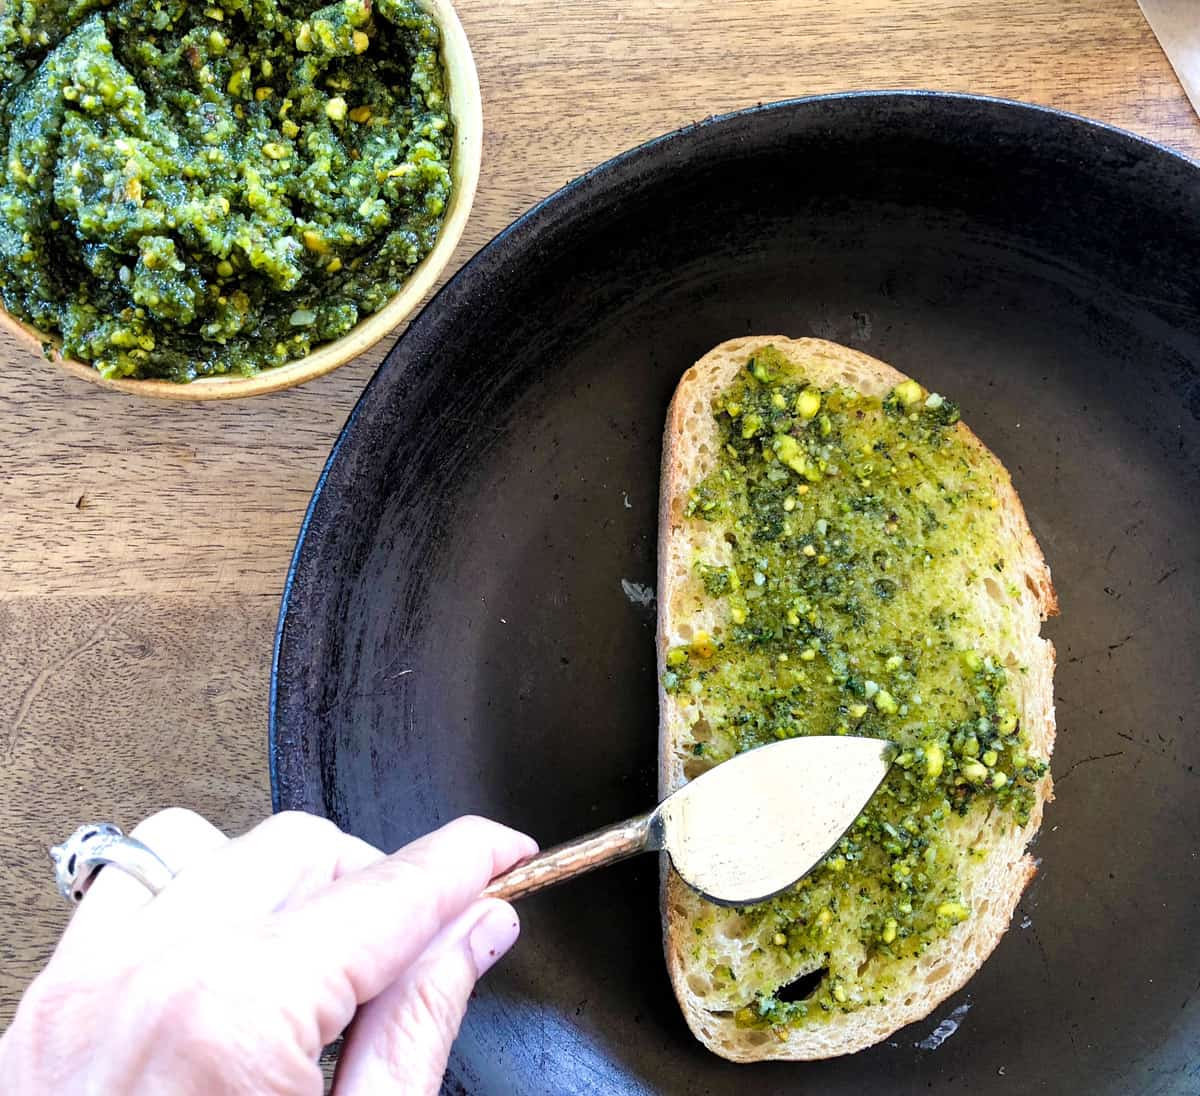 Place buttered side down into a pan and add the Pesto to the bread